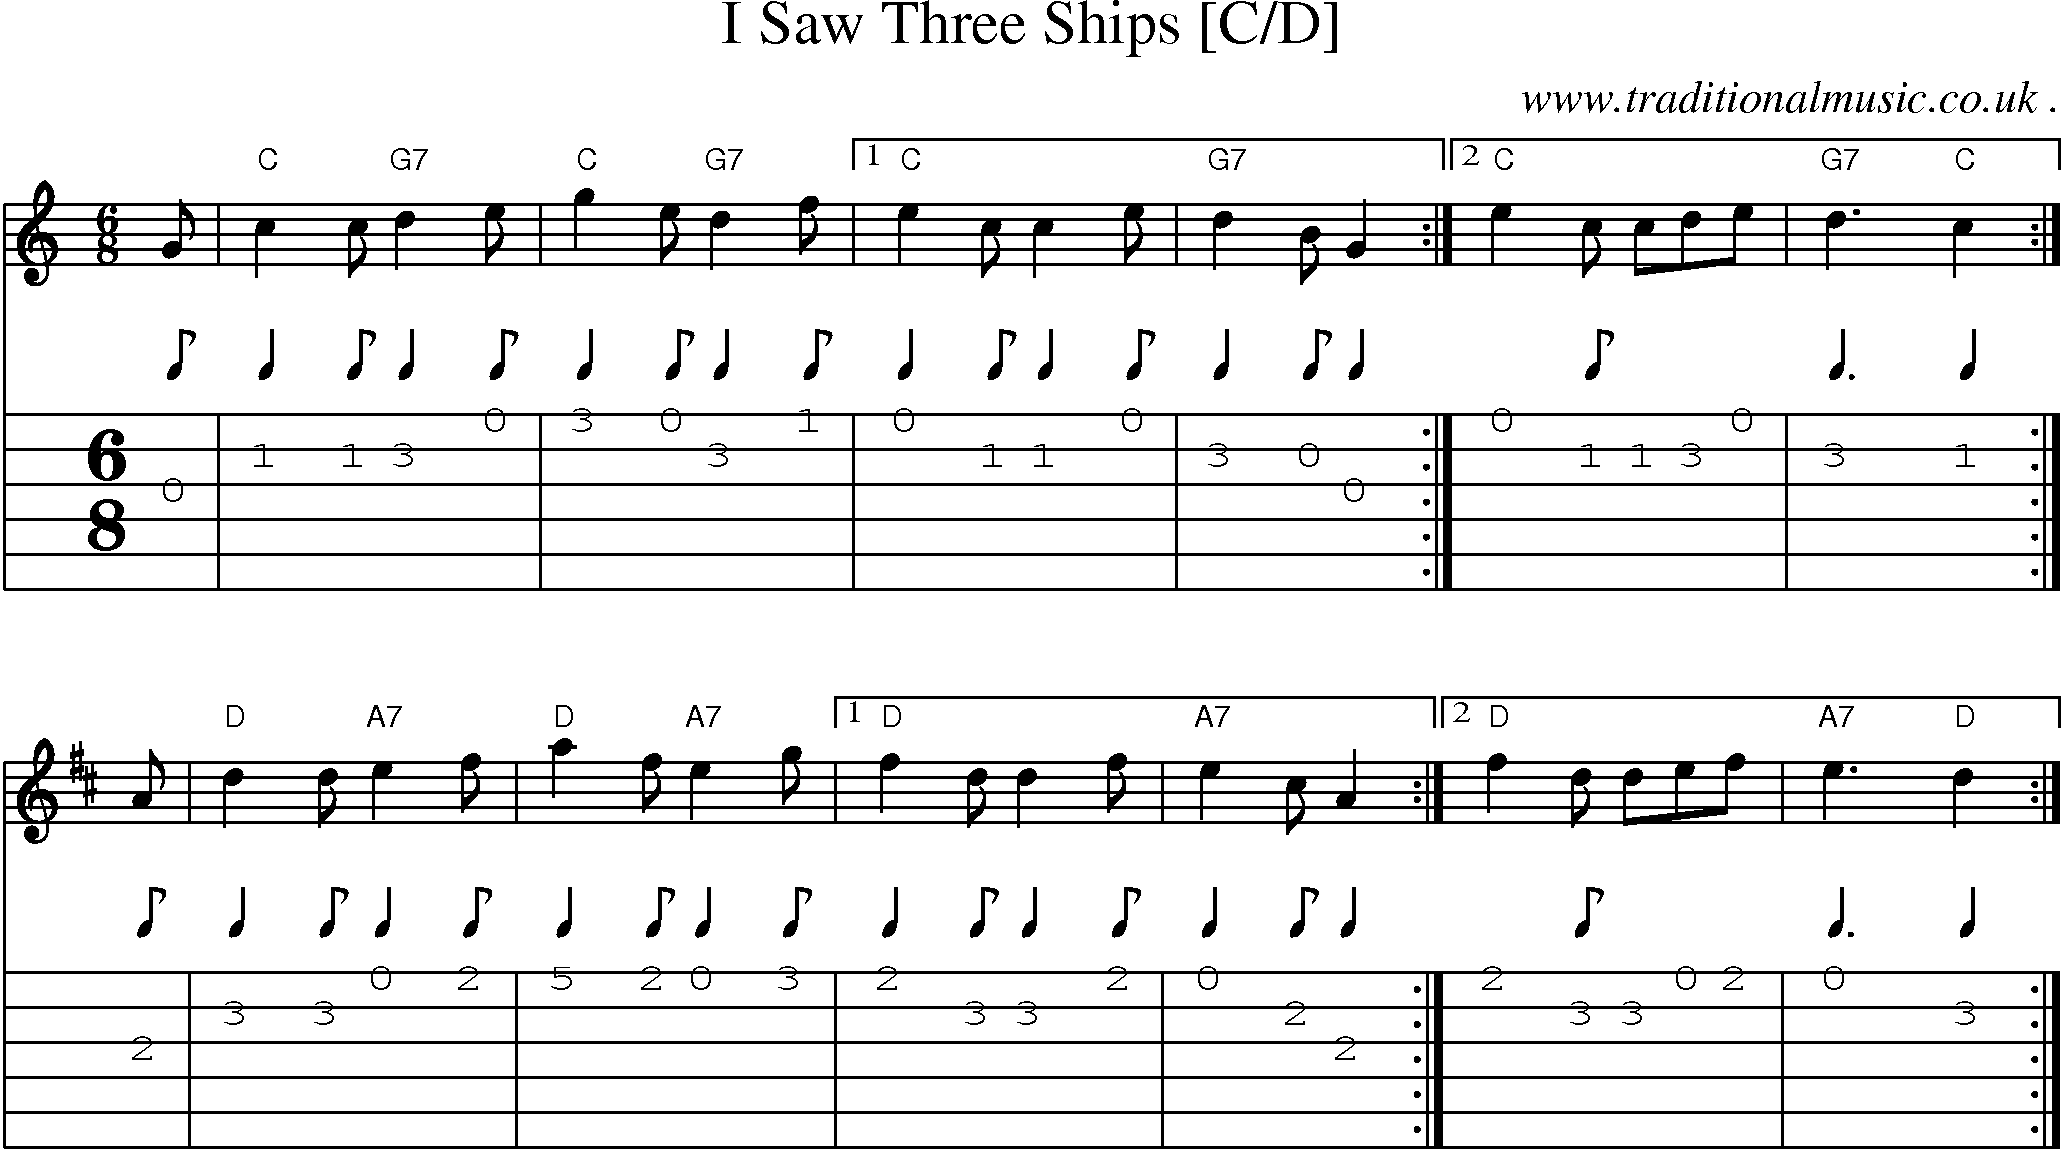 Sheet-music  score, Chords and Guitar Tabs for I Saw Three Ships [cd]